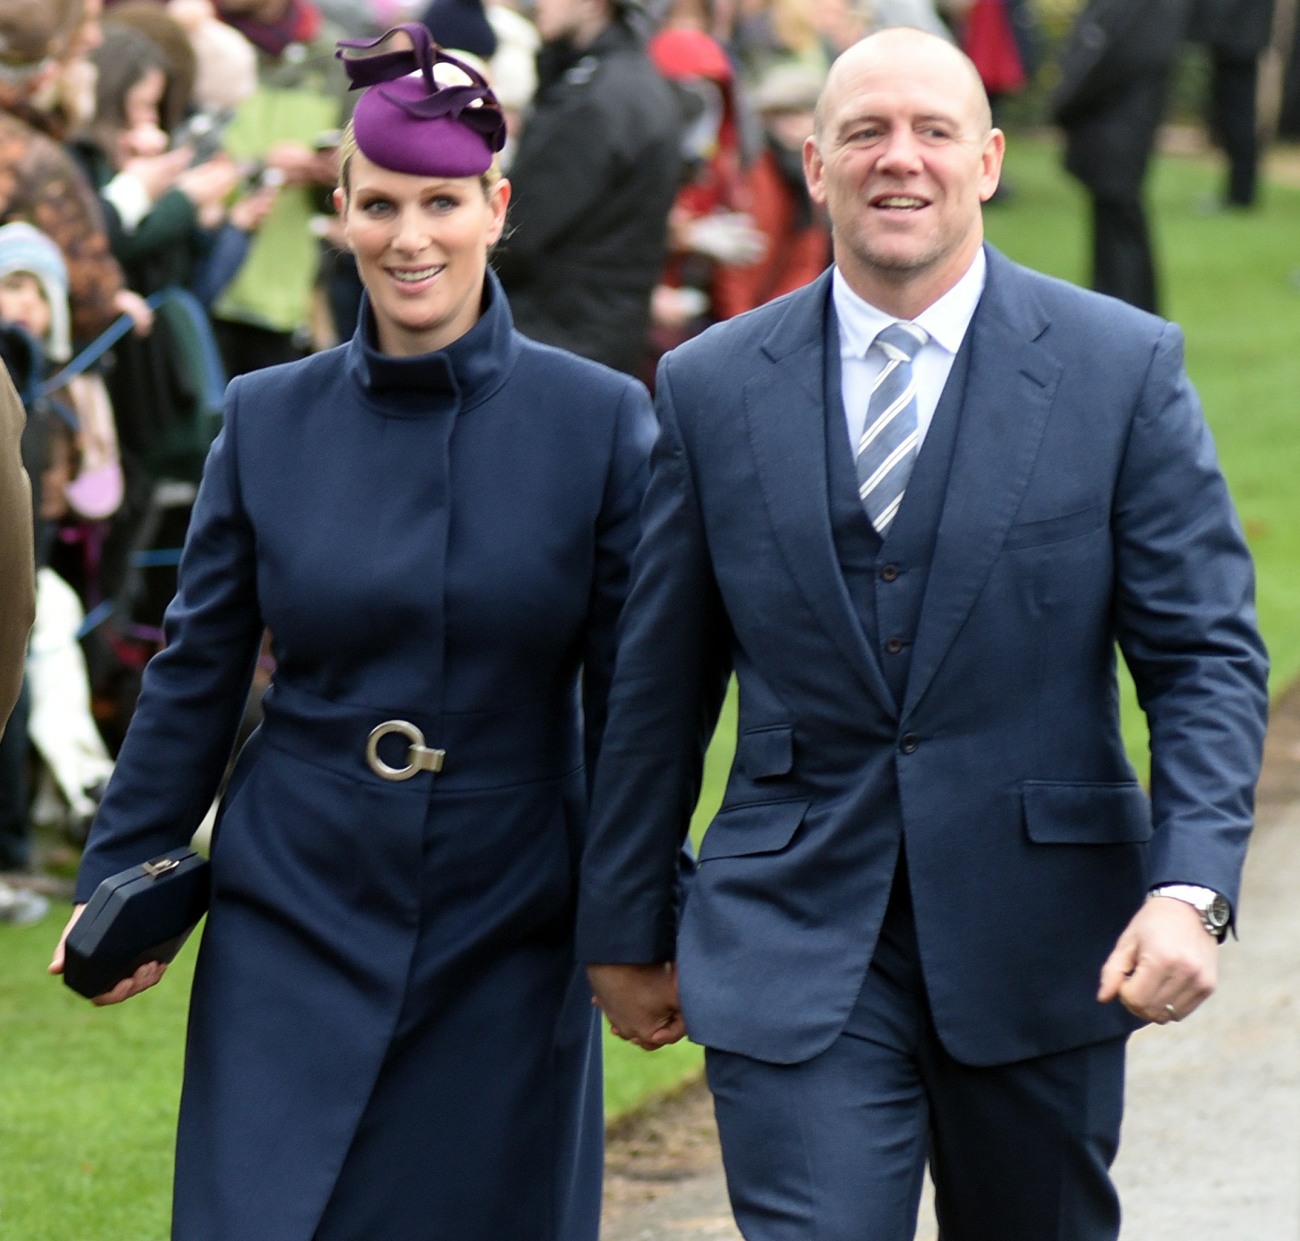 Mike and Zara Tindall arriving for the Xmas Day service at Sandringham Church, 25th December, 2018.